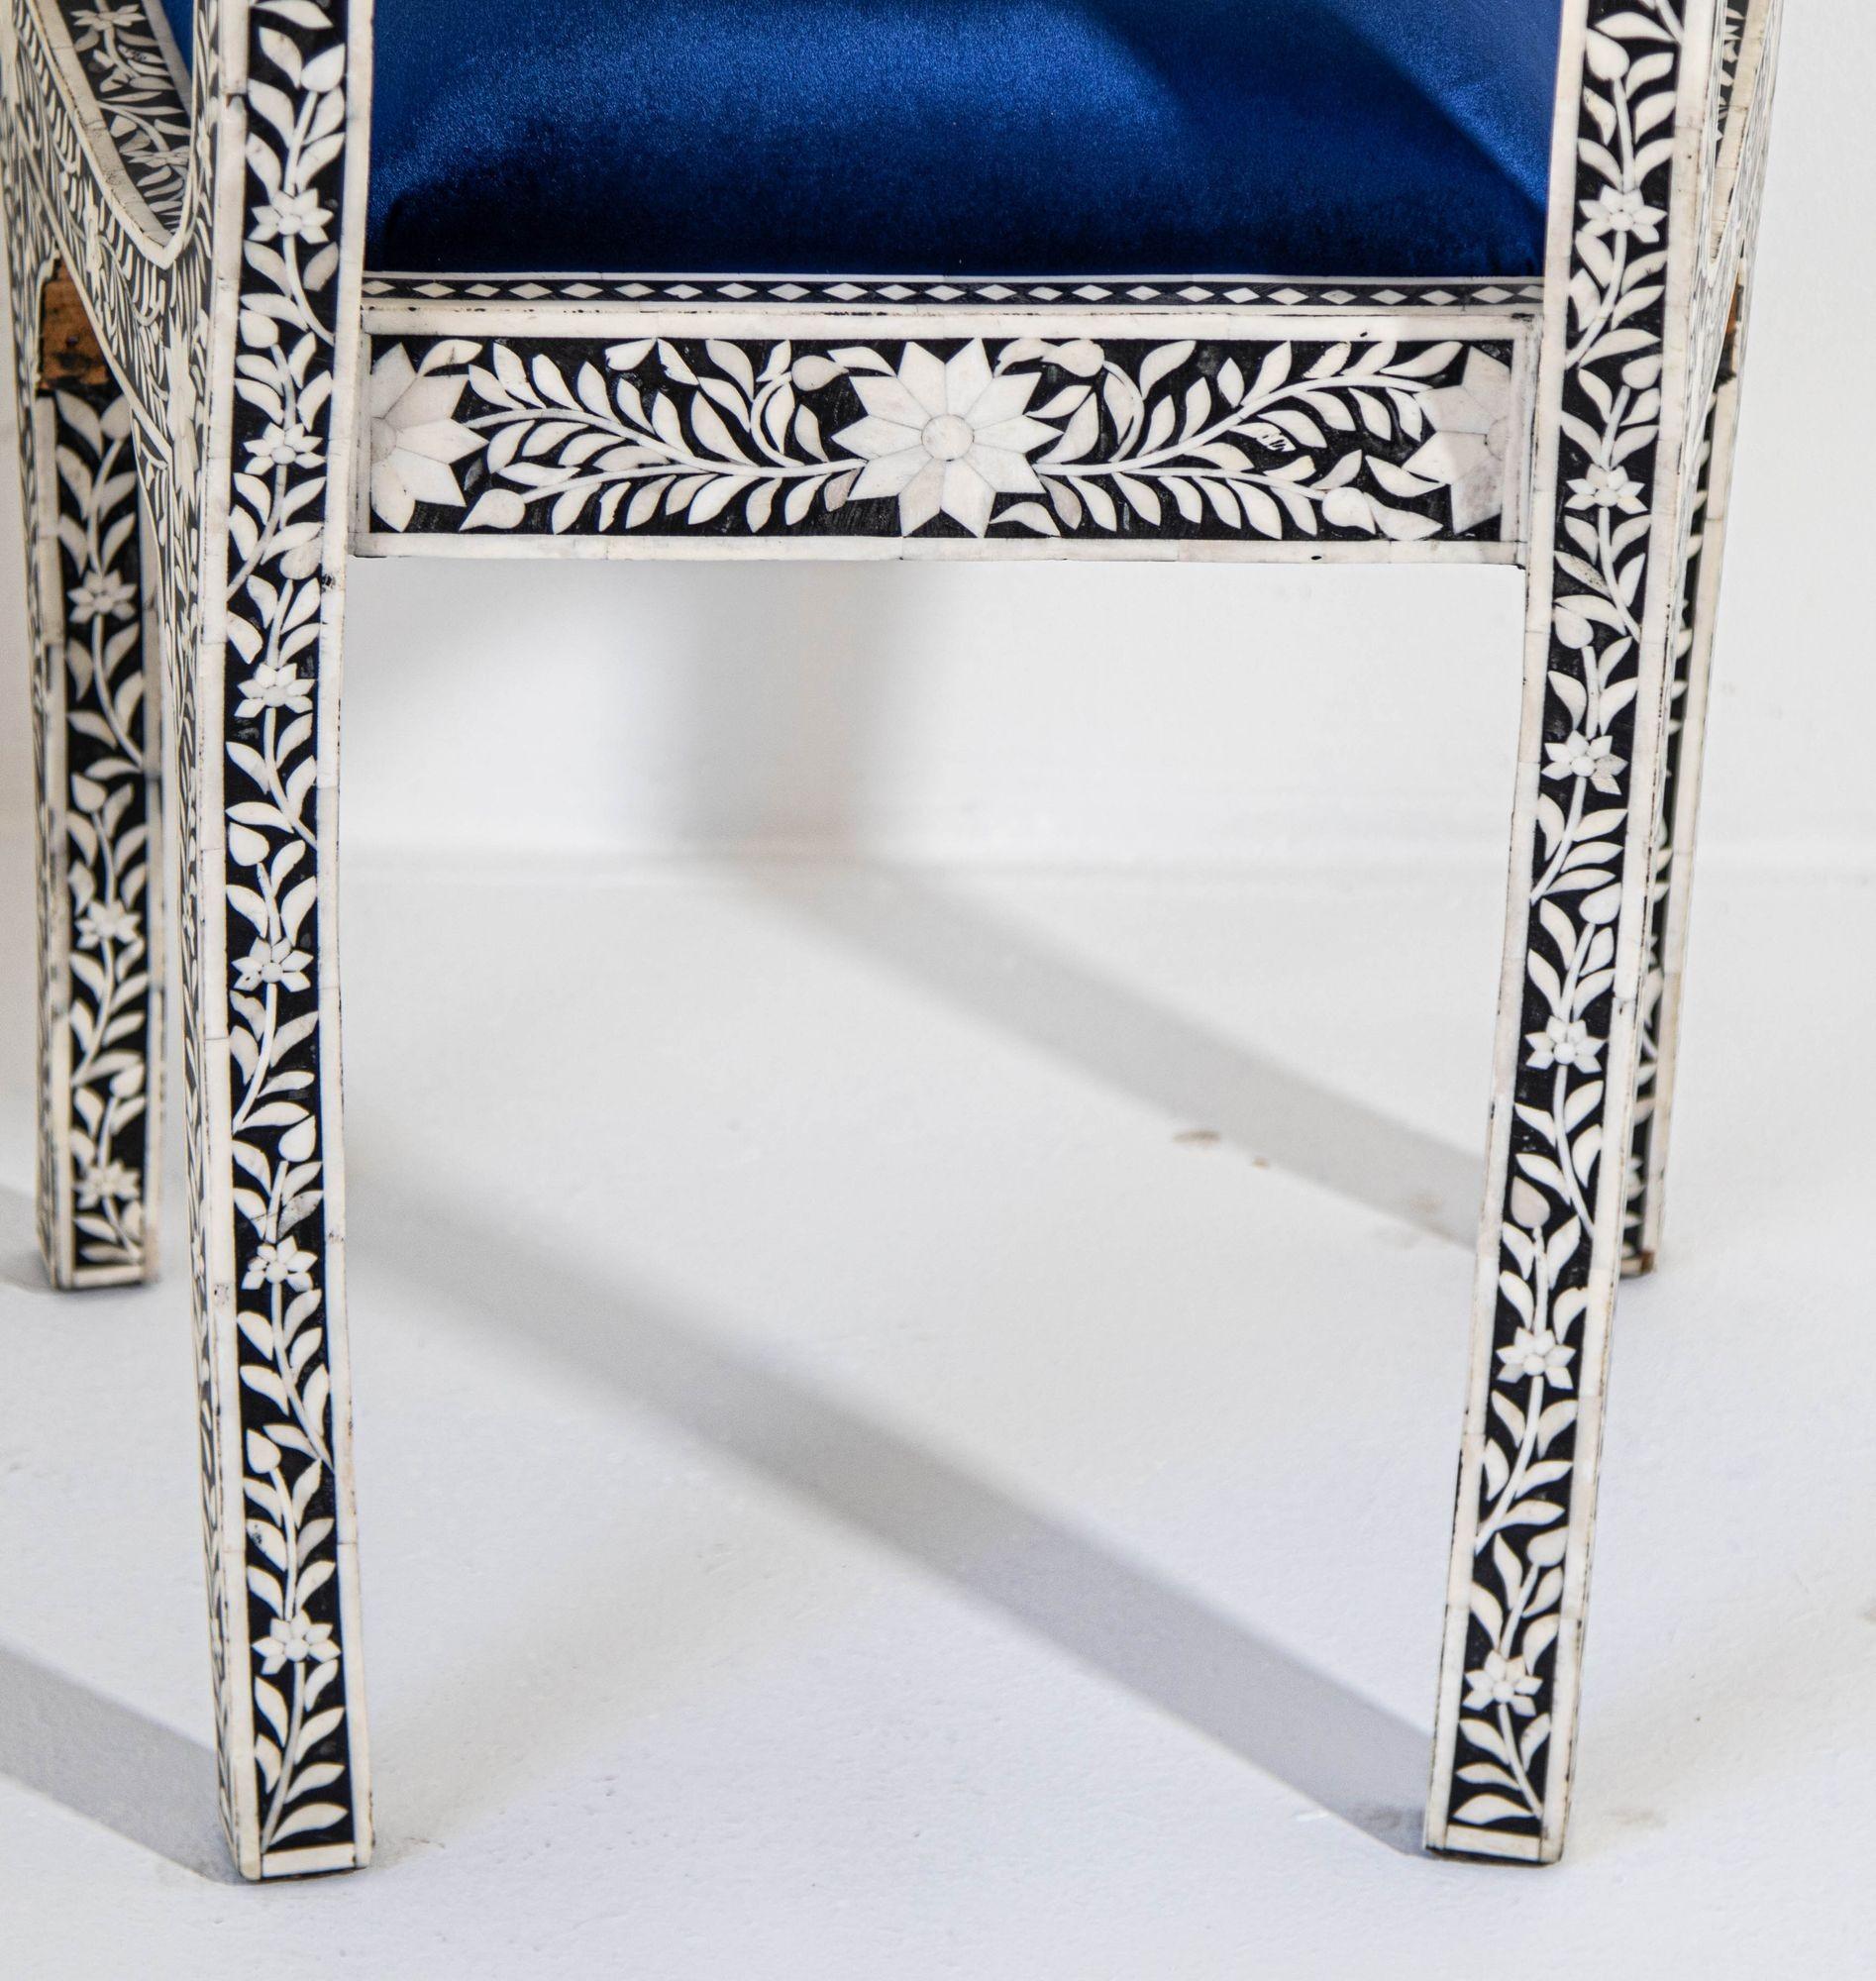 Antique Anglo-Indian Side Chairs with Ram's Head Bone Inlay Royal Blue Seat Pair For Sale 8